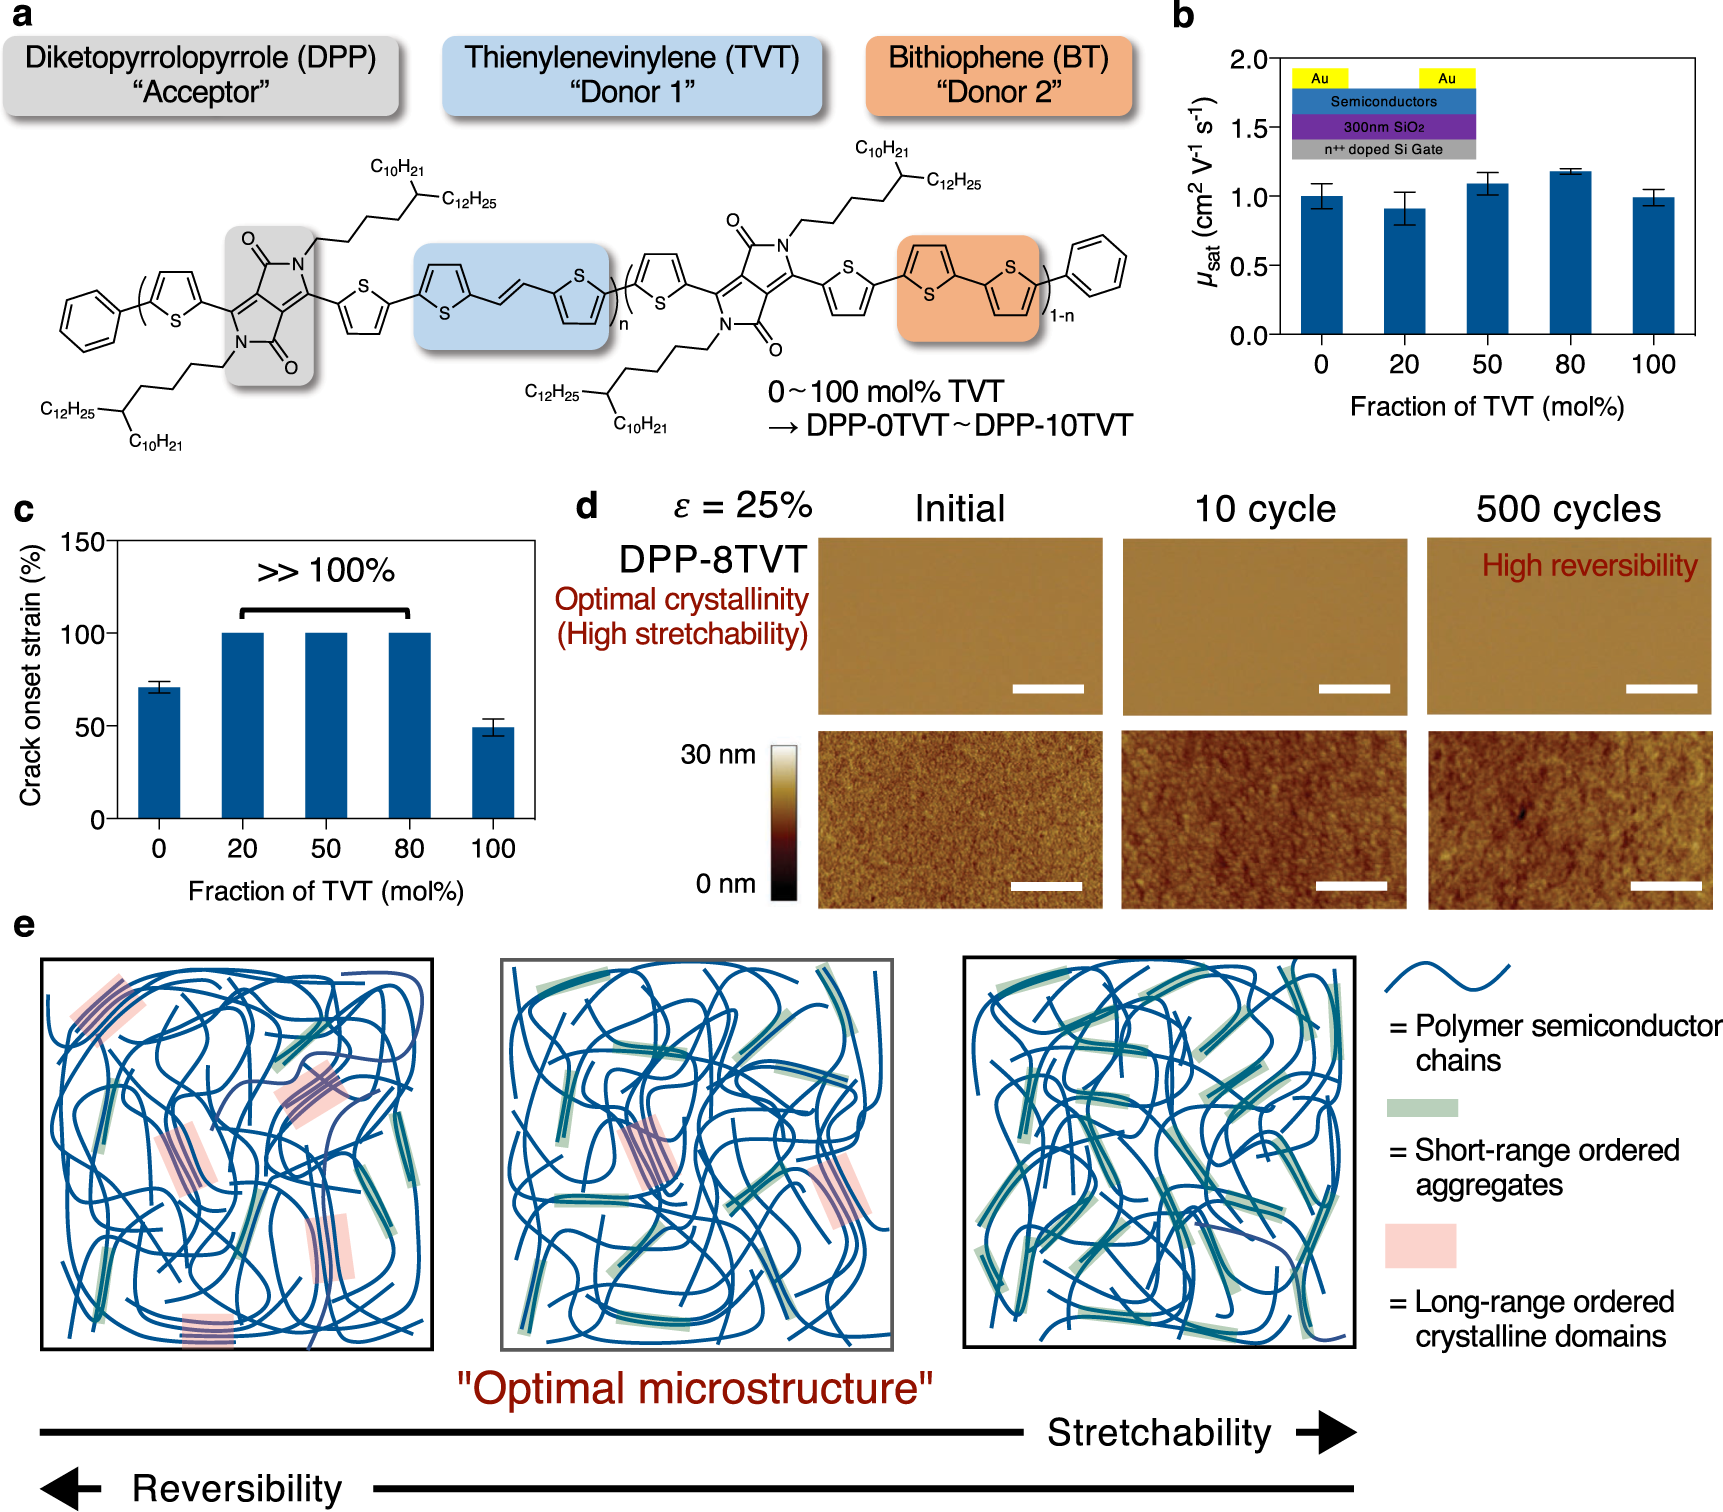 Controlling morphology and microstructure of conjugated polymers